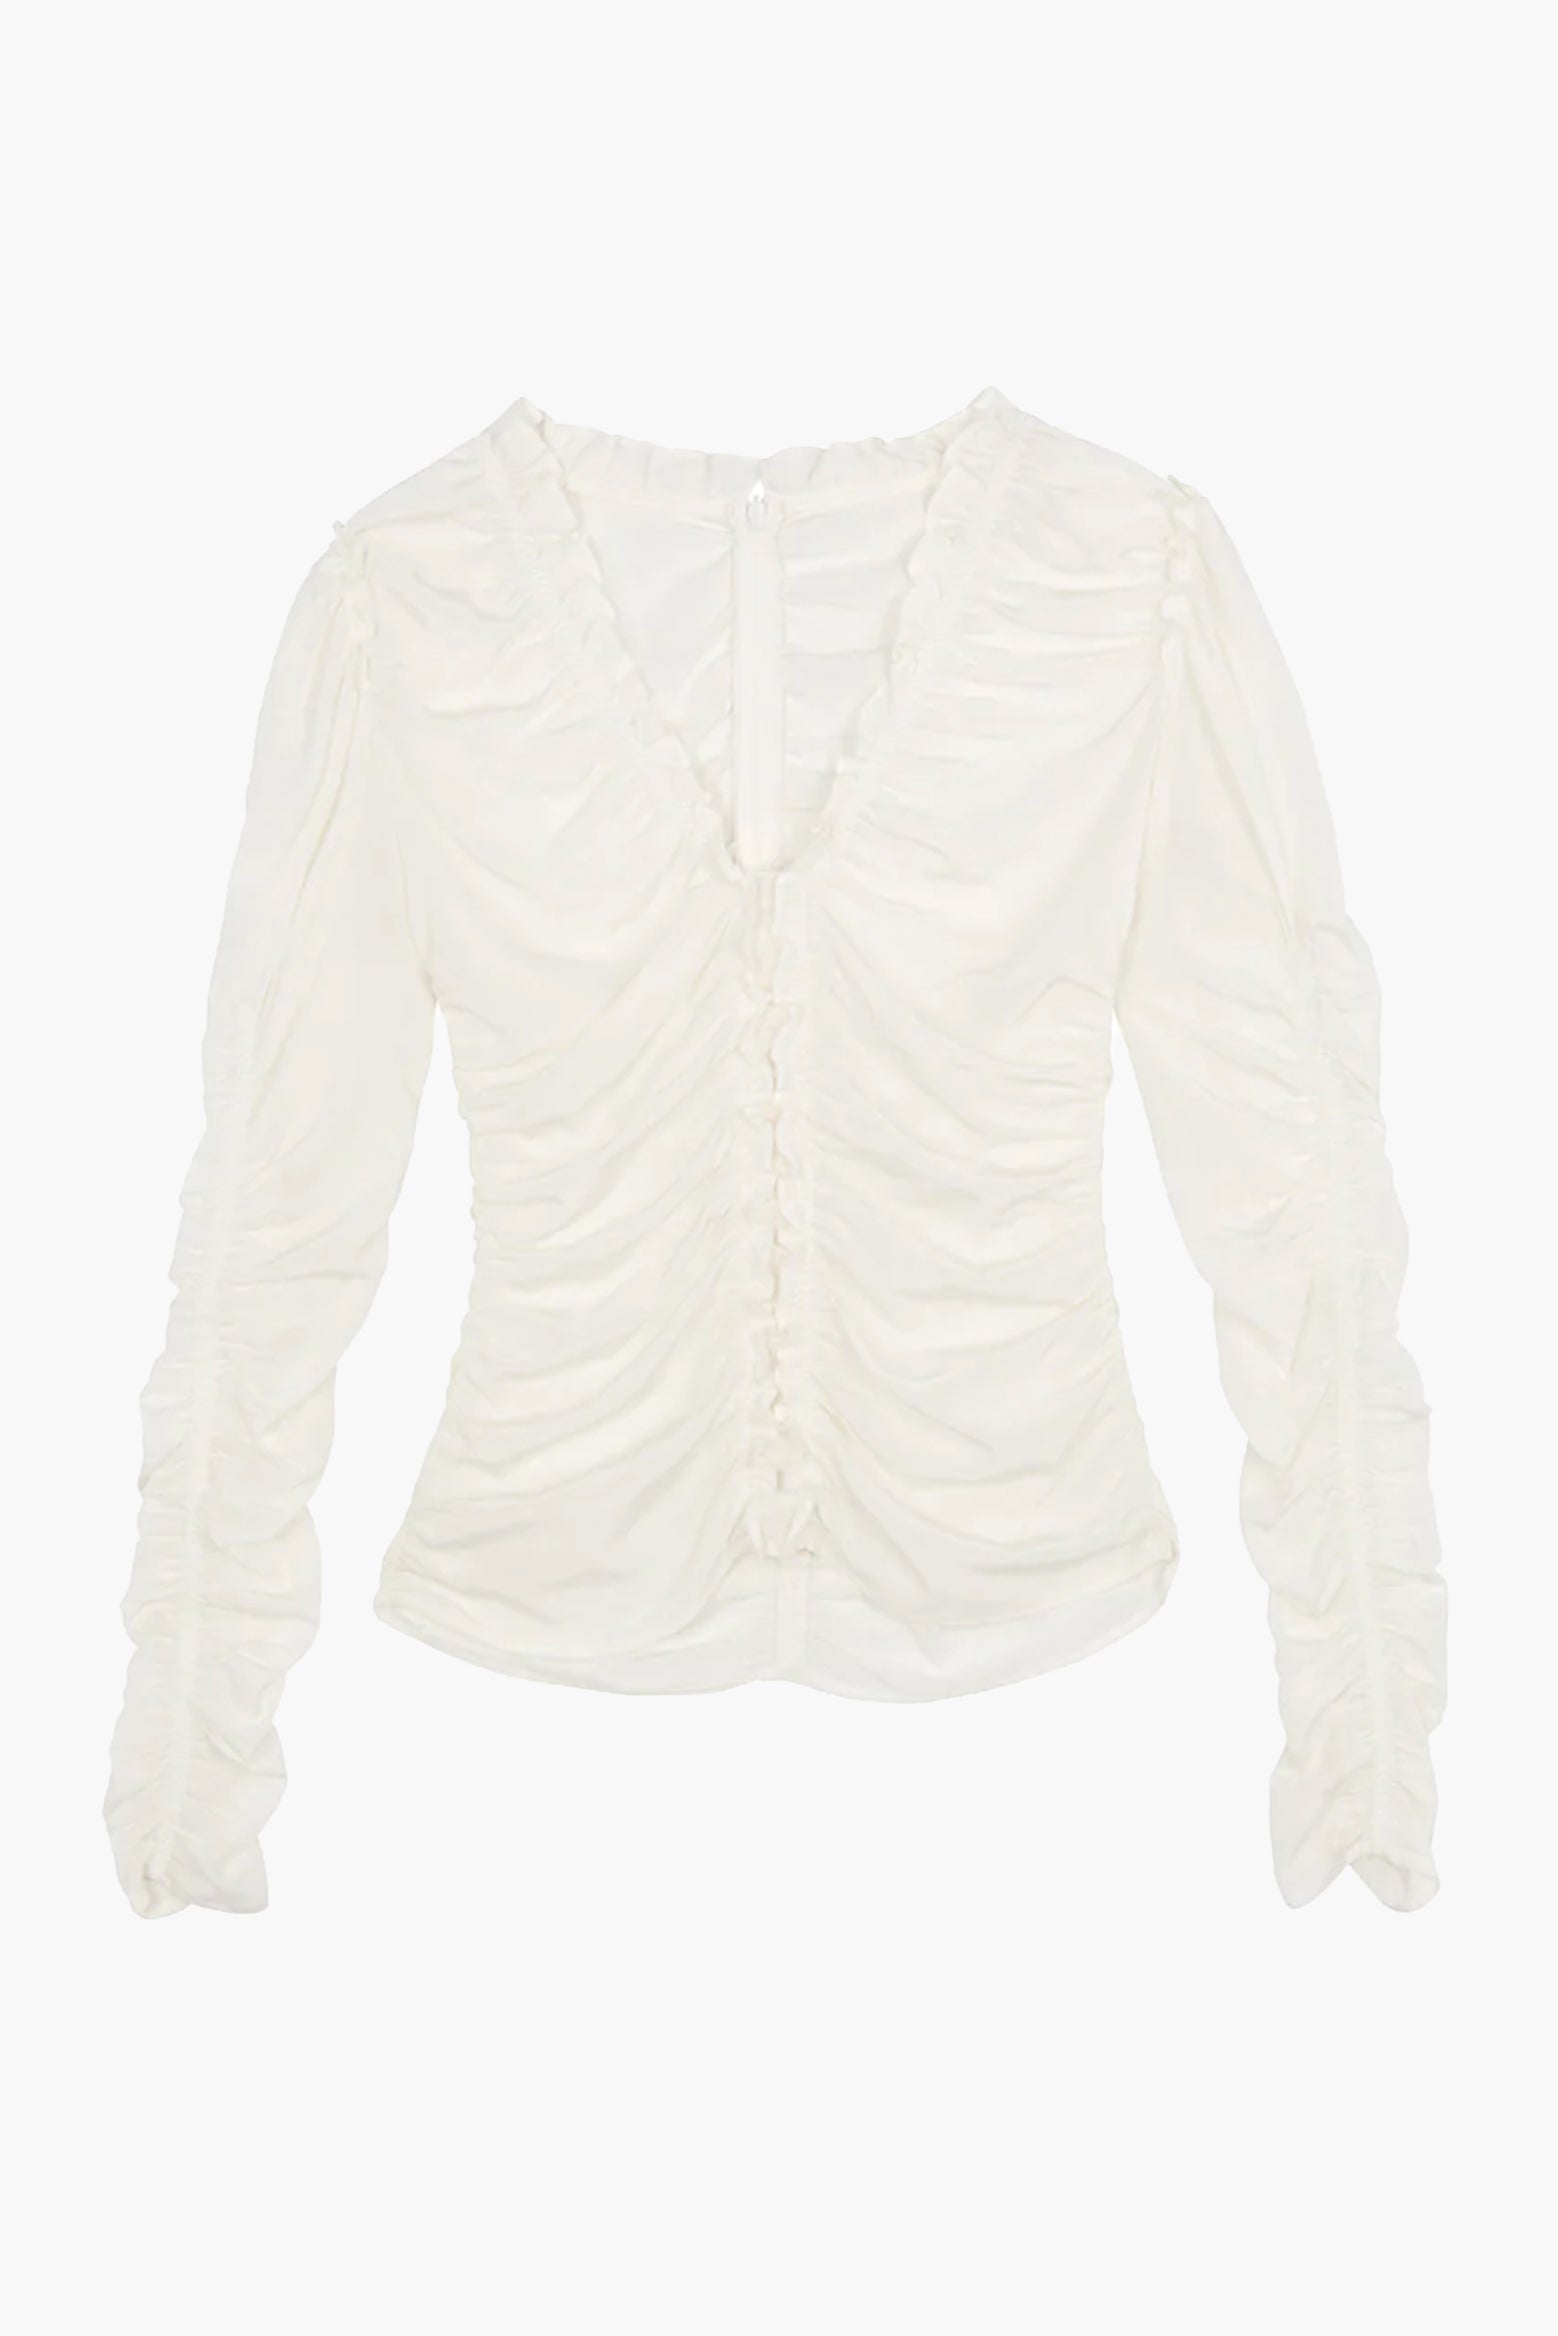 A.L.C Beckett Top in Whisper White available at The New Trend Australia.